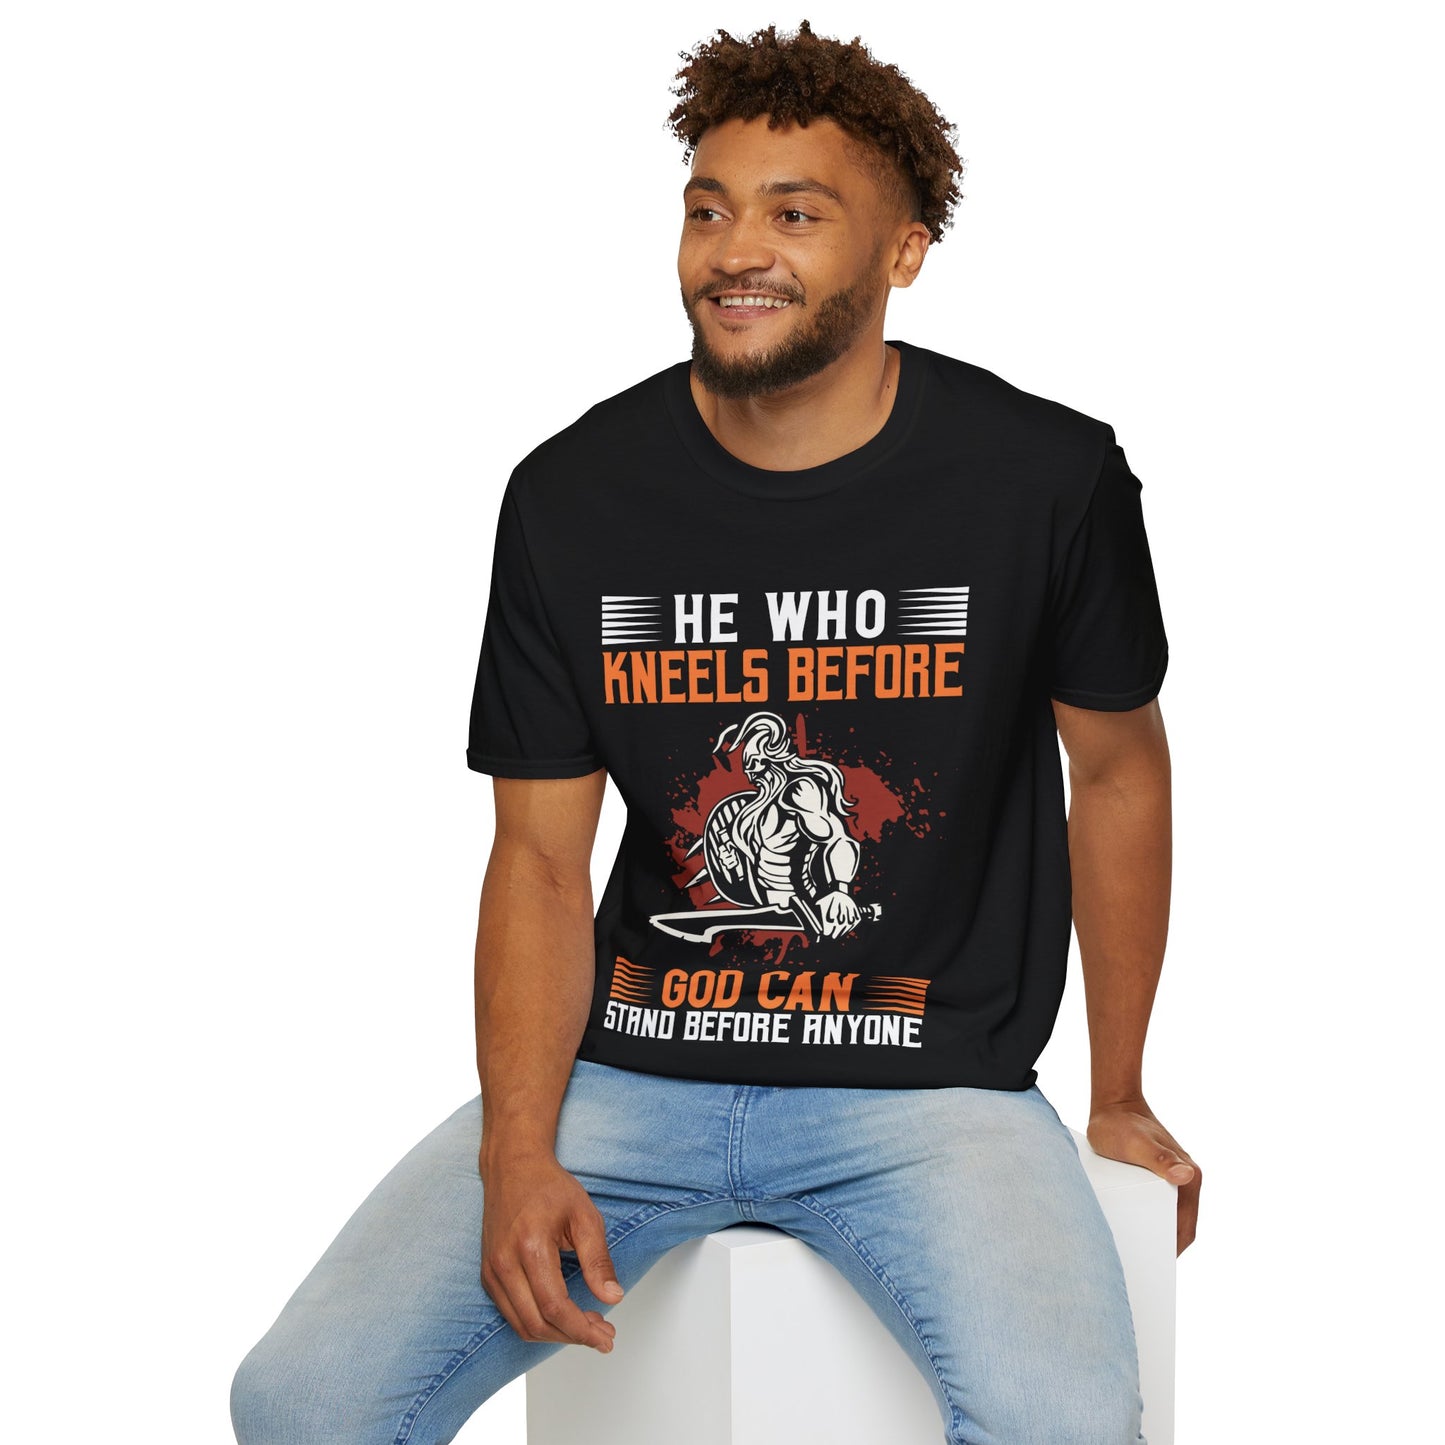 He Who Kneels Before God Can Stand Before Anyone T-Shirt